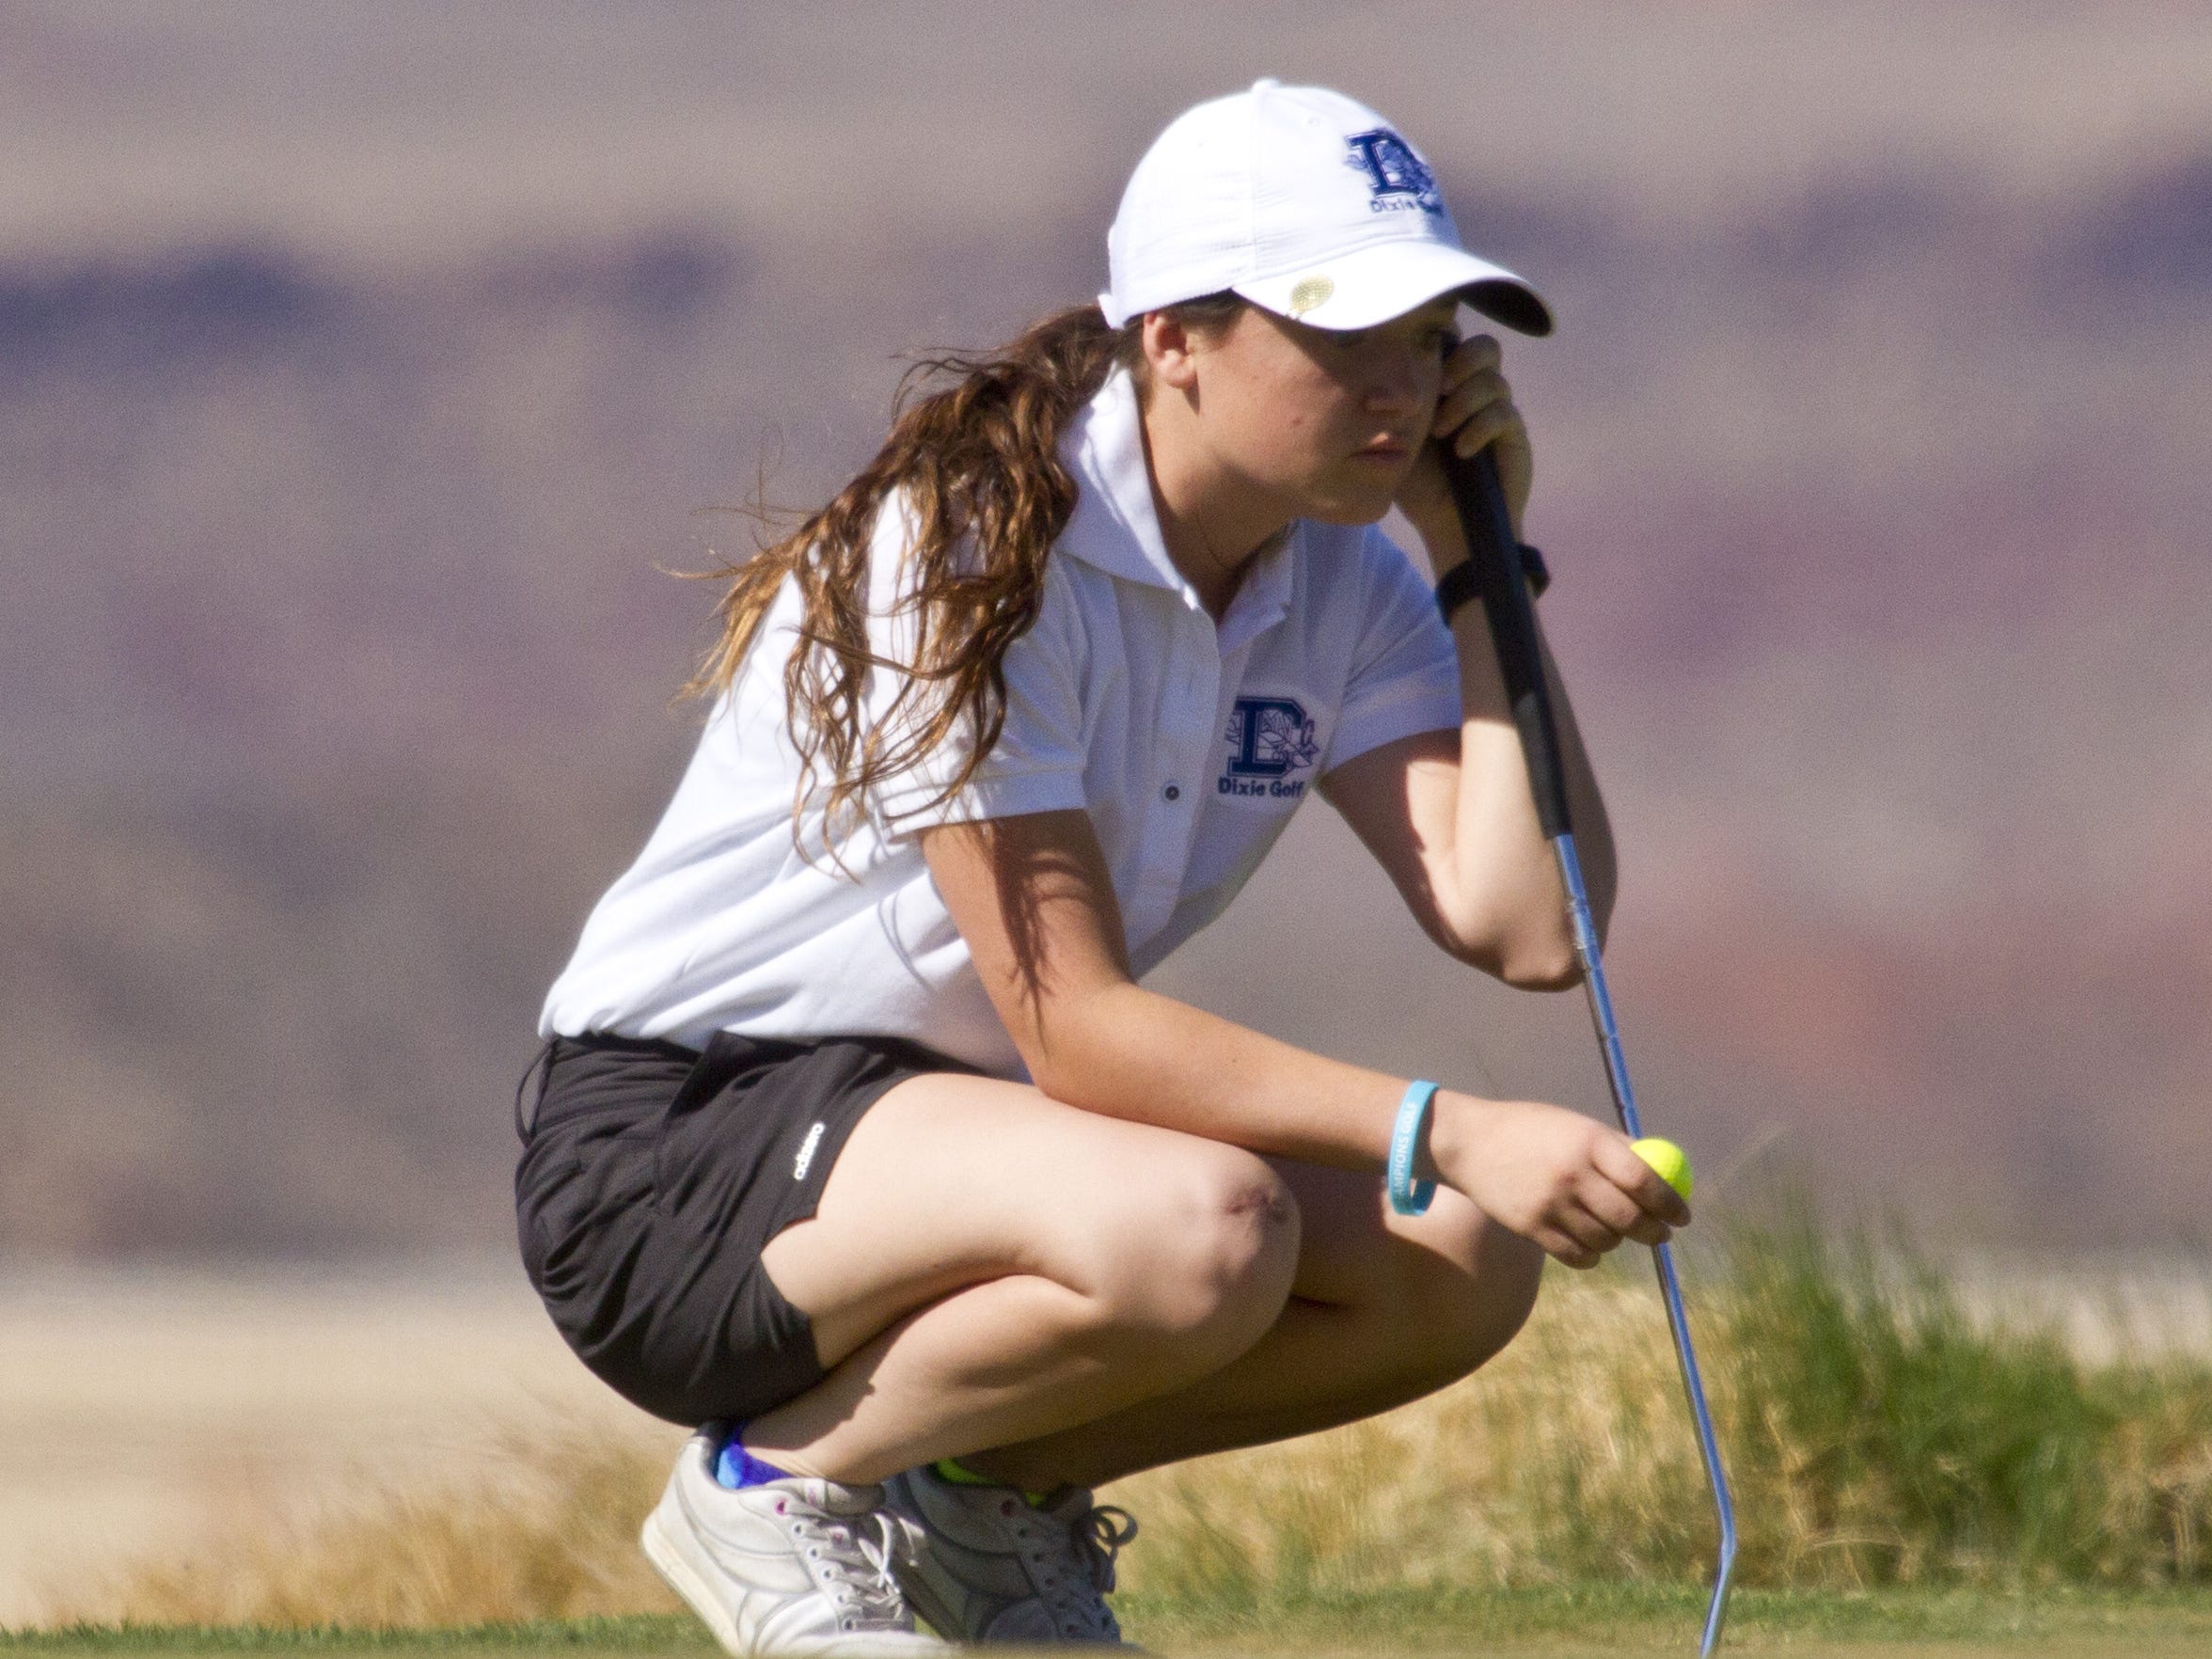 Dixie’s Gracie Richins thinks over a putt at Sand Hollow Thursday, March 19, 2015.